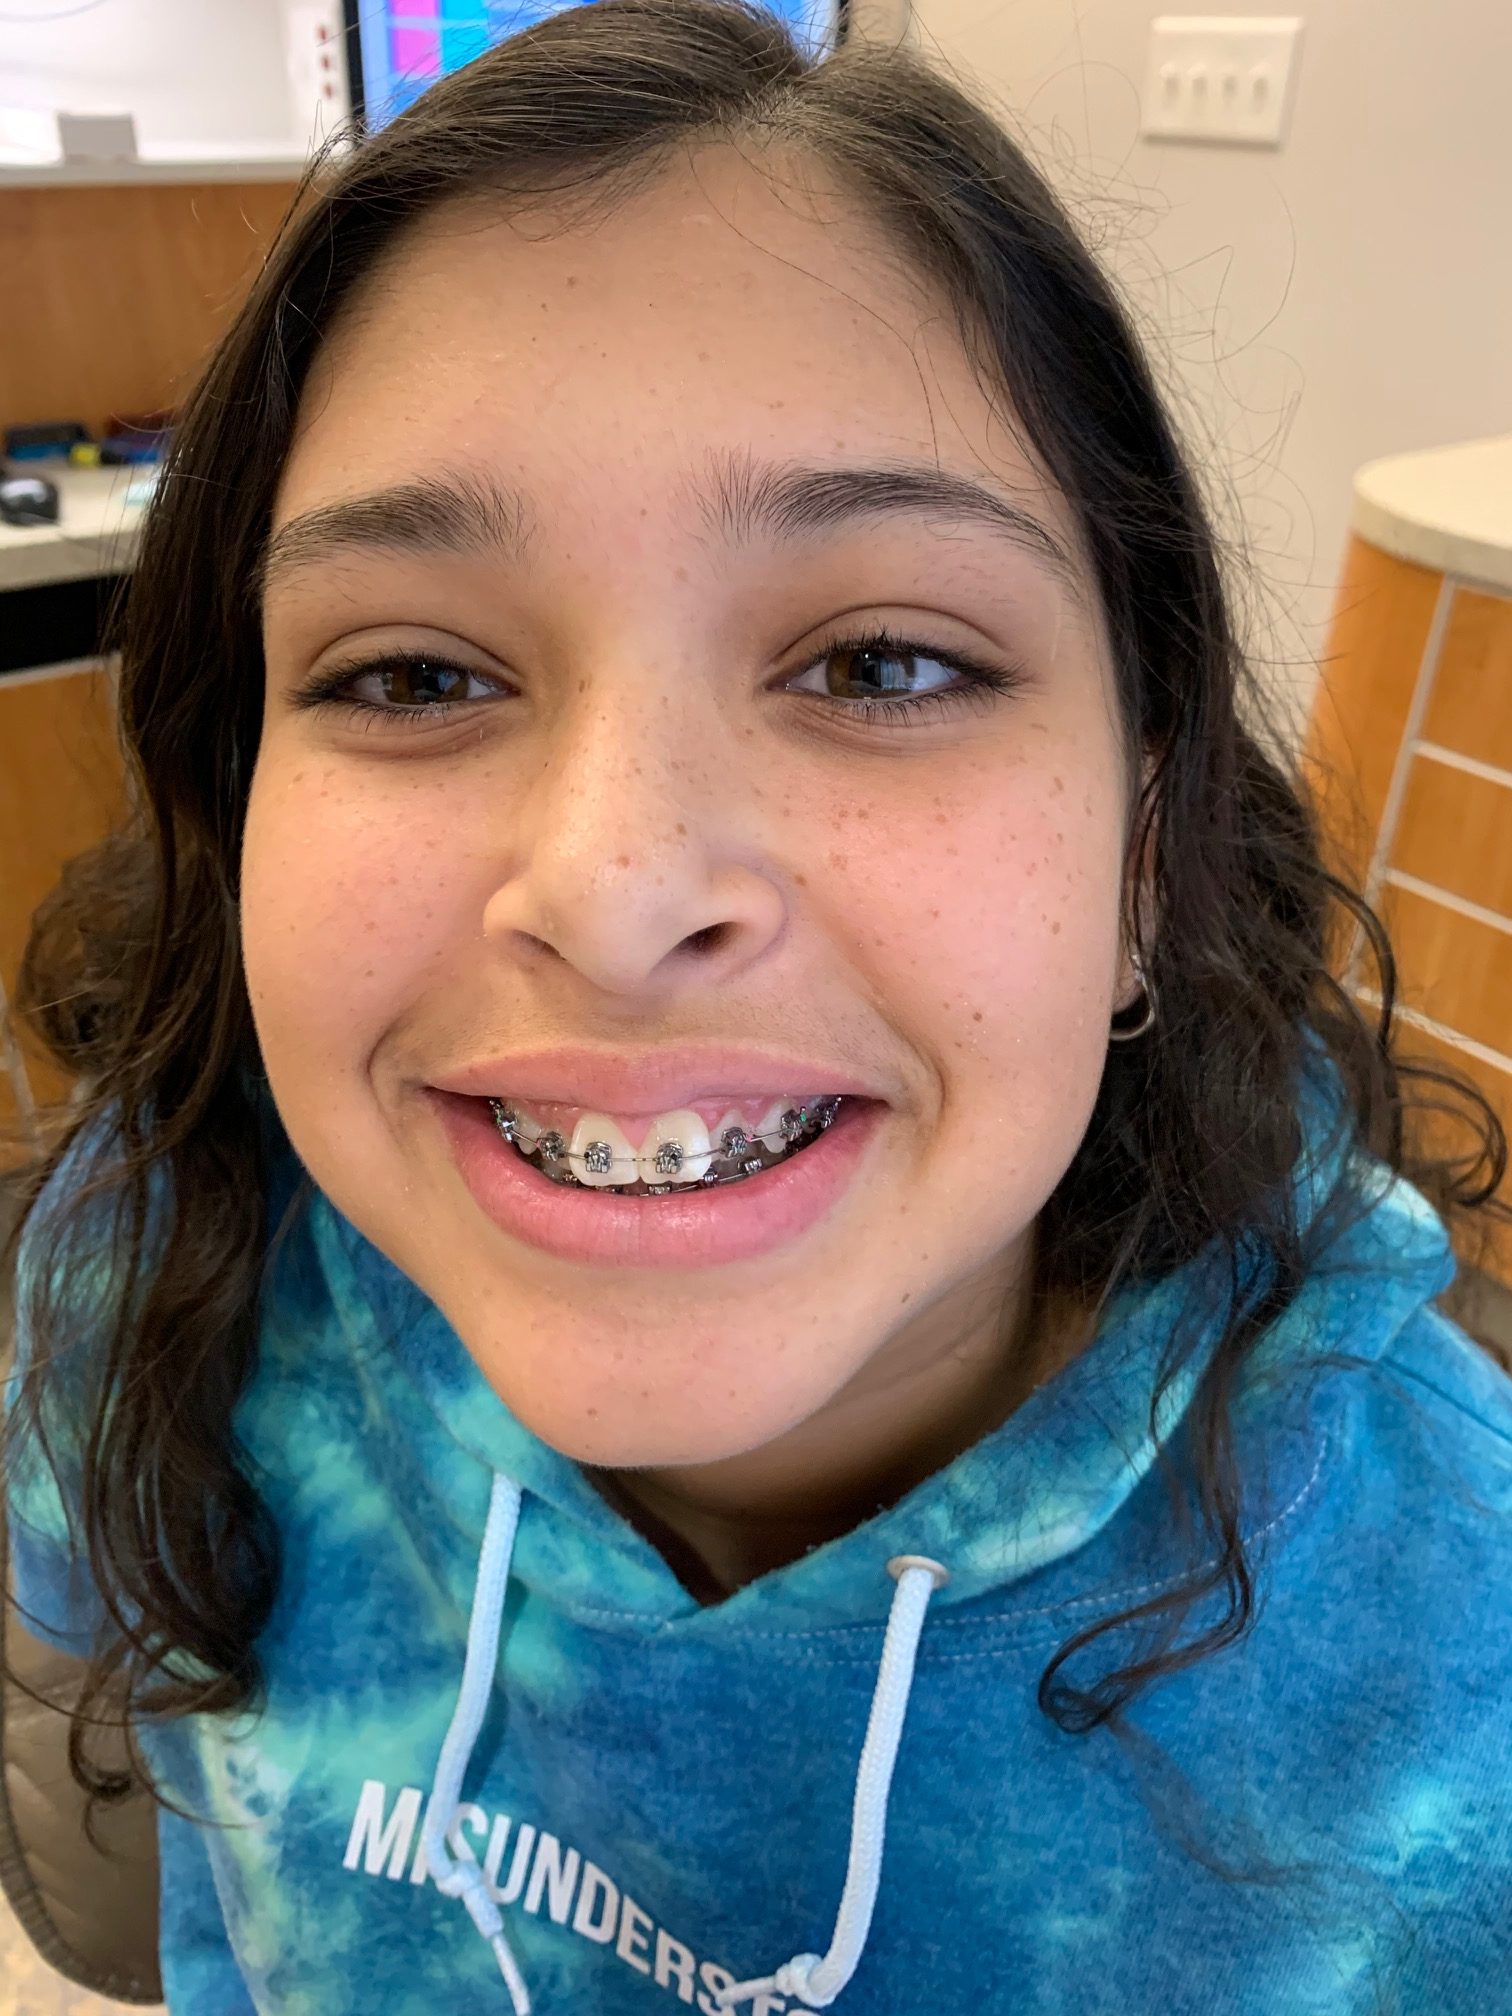 How Much Do Braces Cost With and Without Insurance?